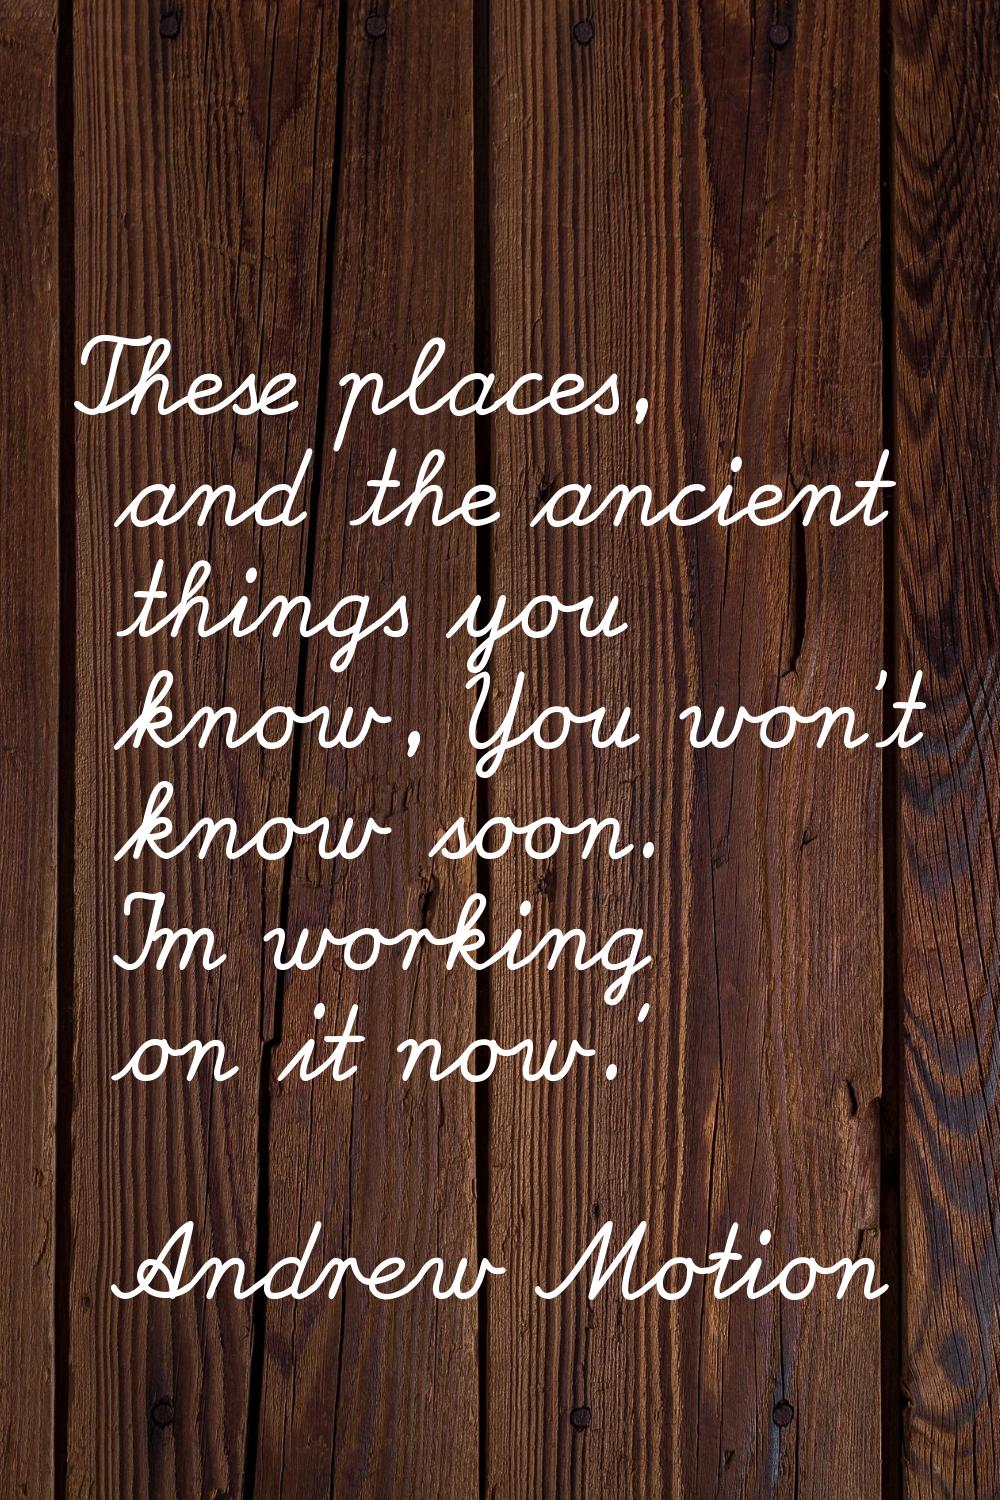 These places, and the ancient things you know, You won't know soon. I'm working on it now.'